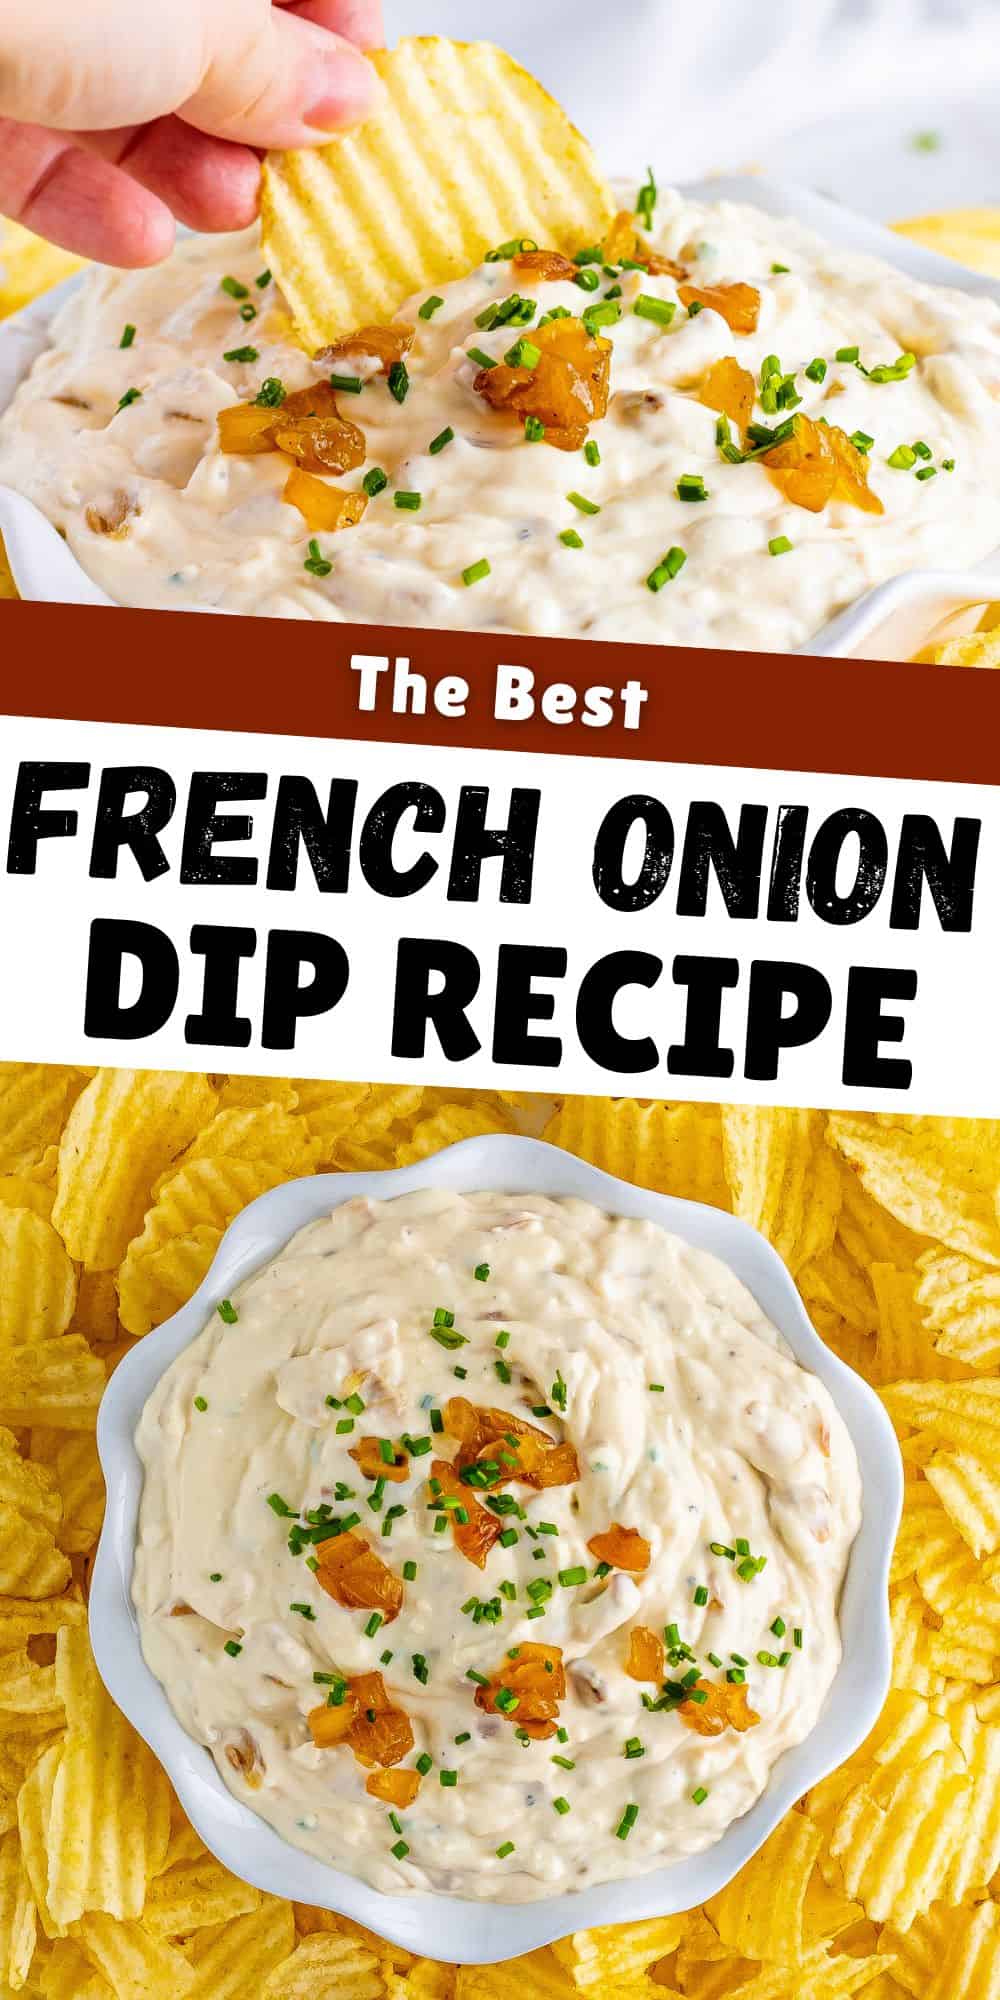 The Best French Onion Dip Recipe.